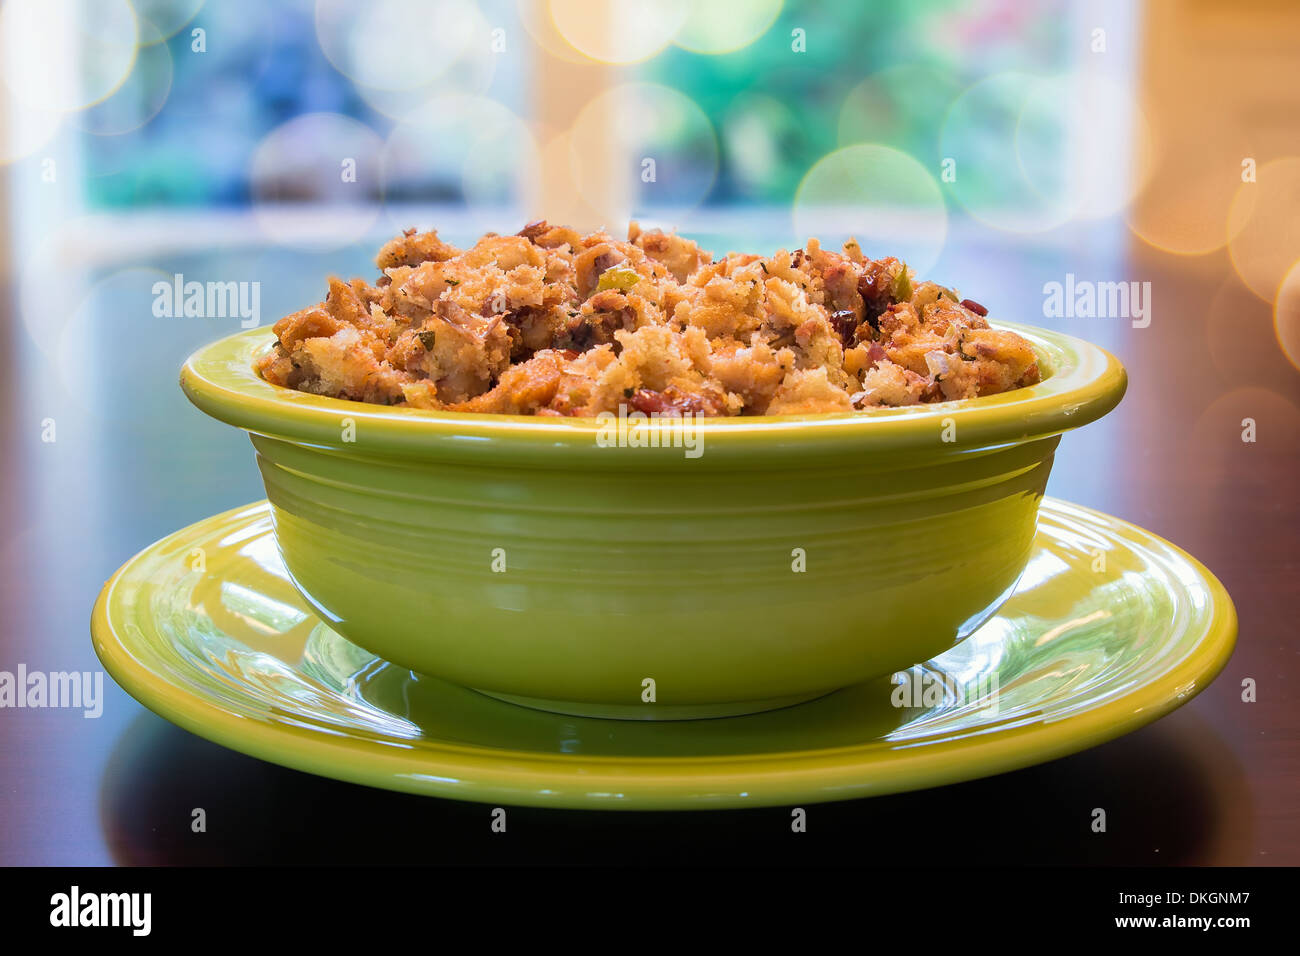 Thanksgiving Day Turkey Stuffing with Corn Bread Celery Cranberry in Green Bowl on Wood Table with Blurred Bokeh Lights Stock Photo